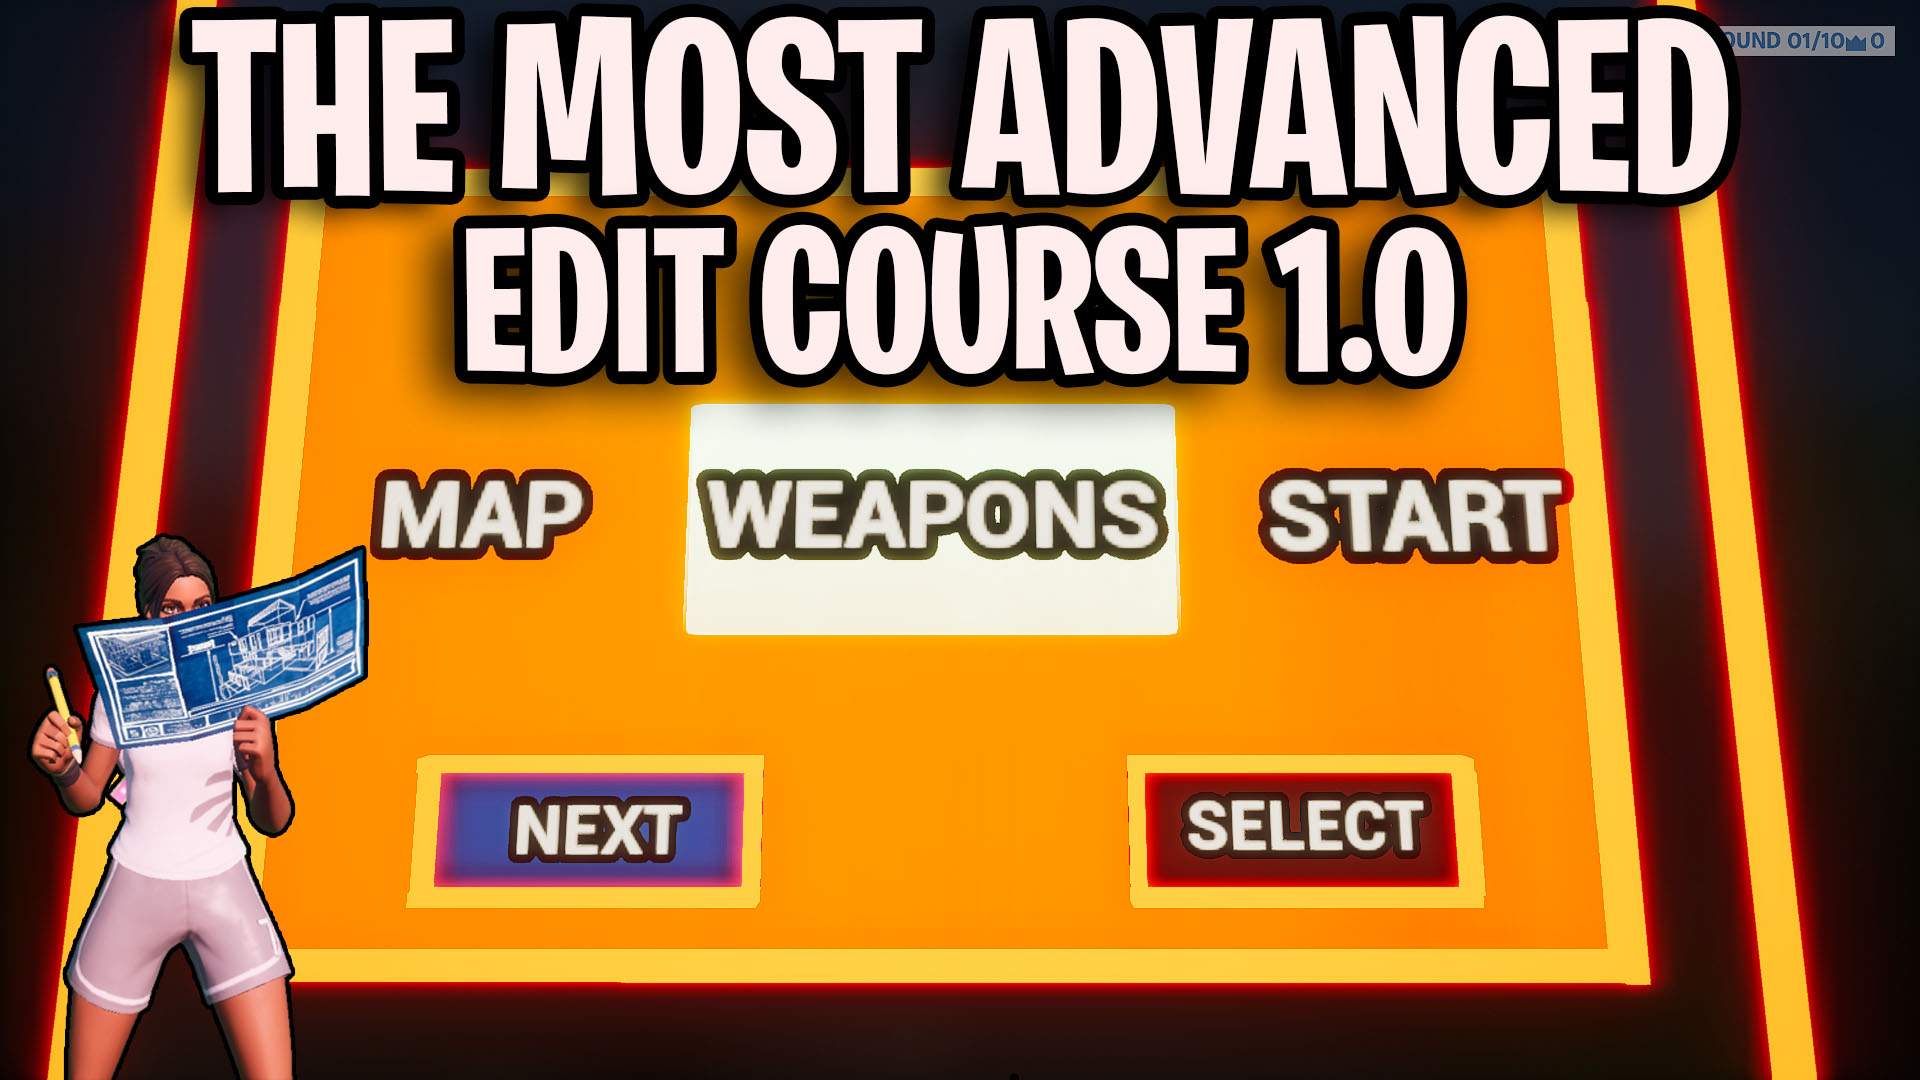 THE MOST ADVANCED EDIT COURSE 1.0